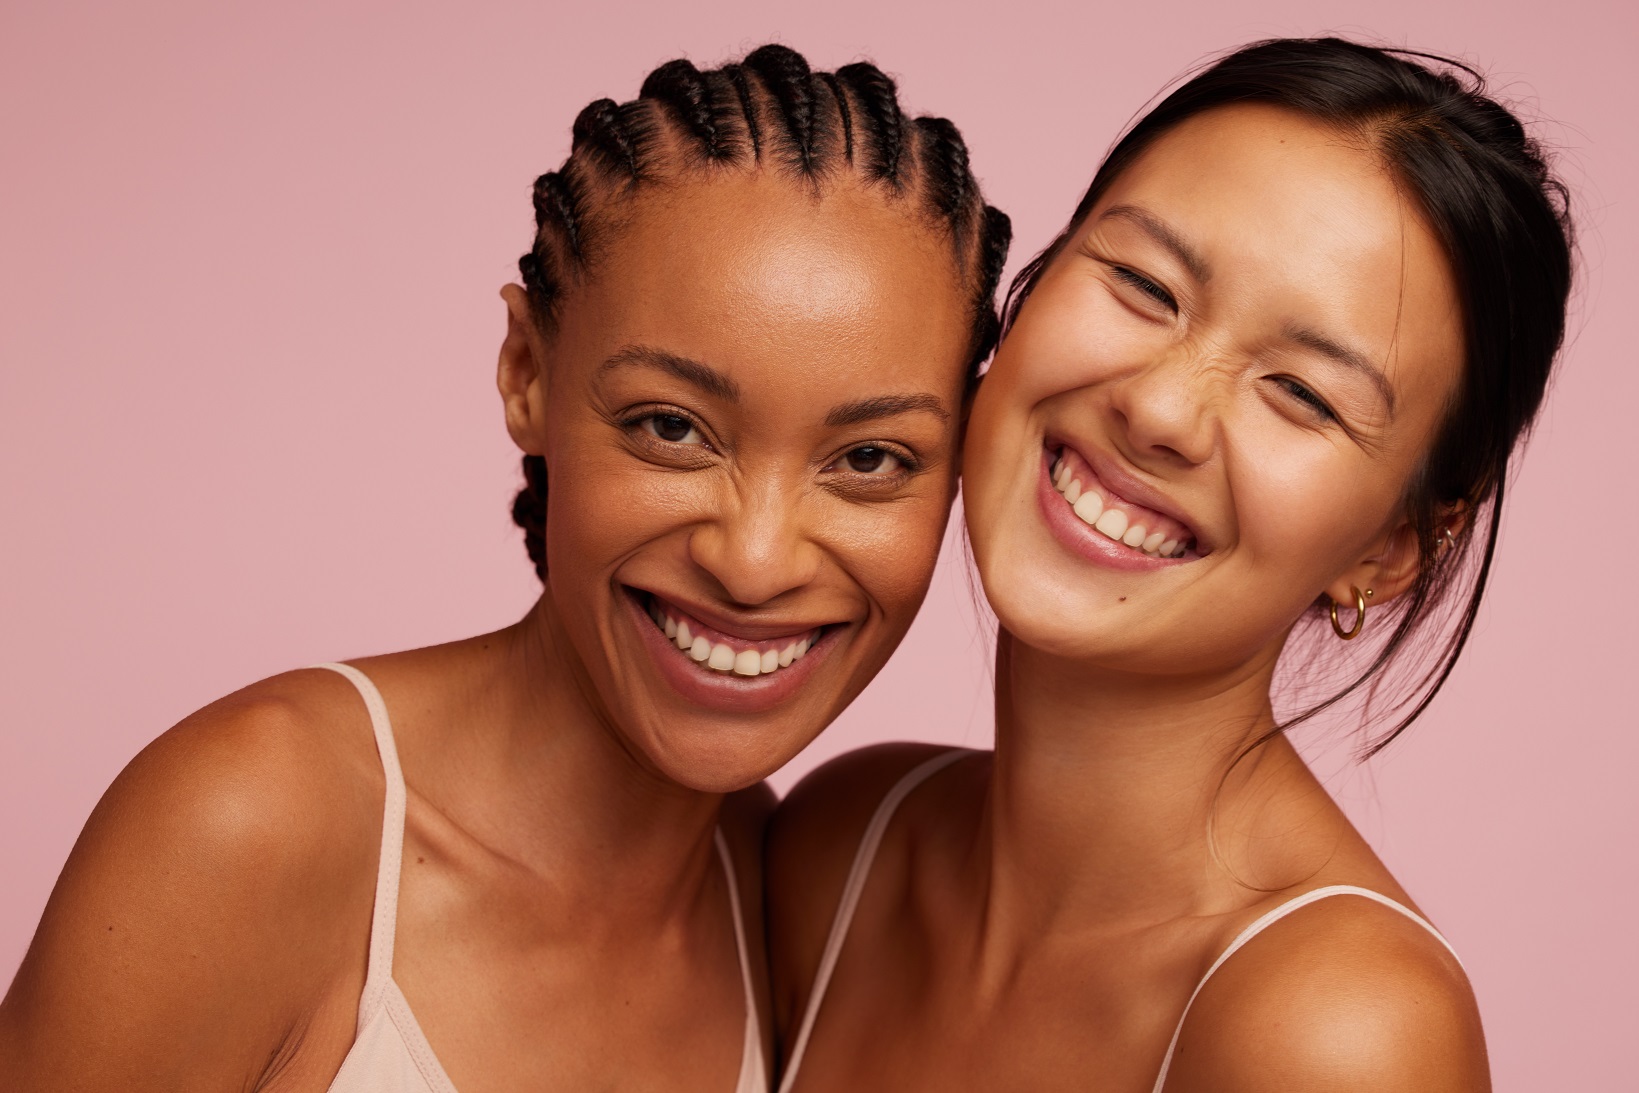 Asian and African Beautiful Smiling Woman | Avail Aesthetics in Raleigh, NC